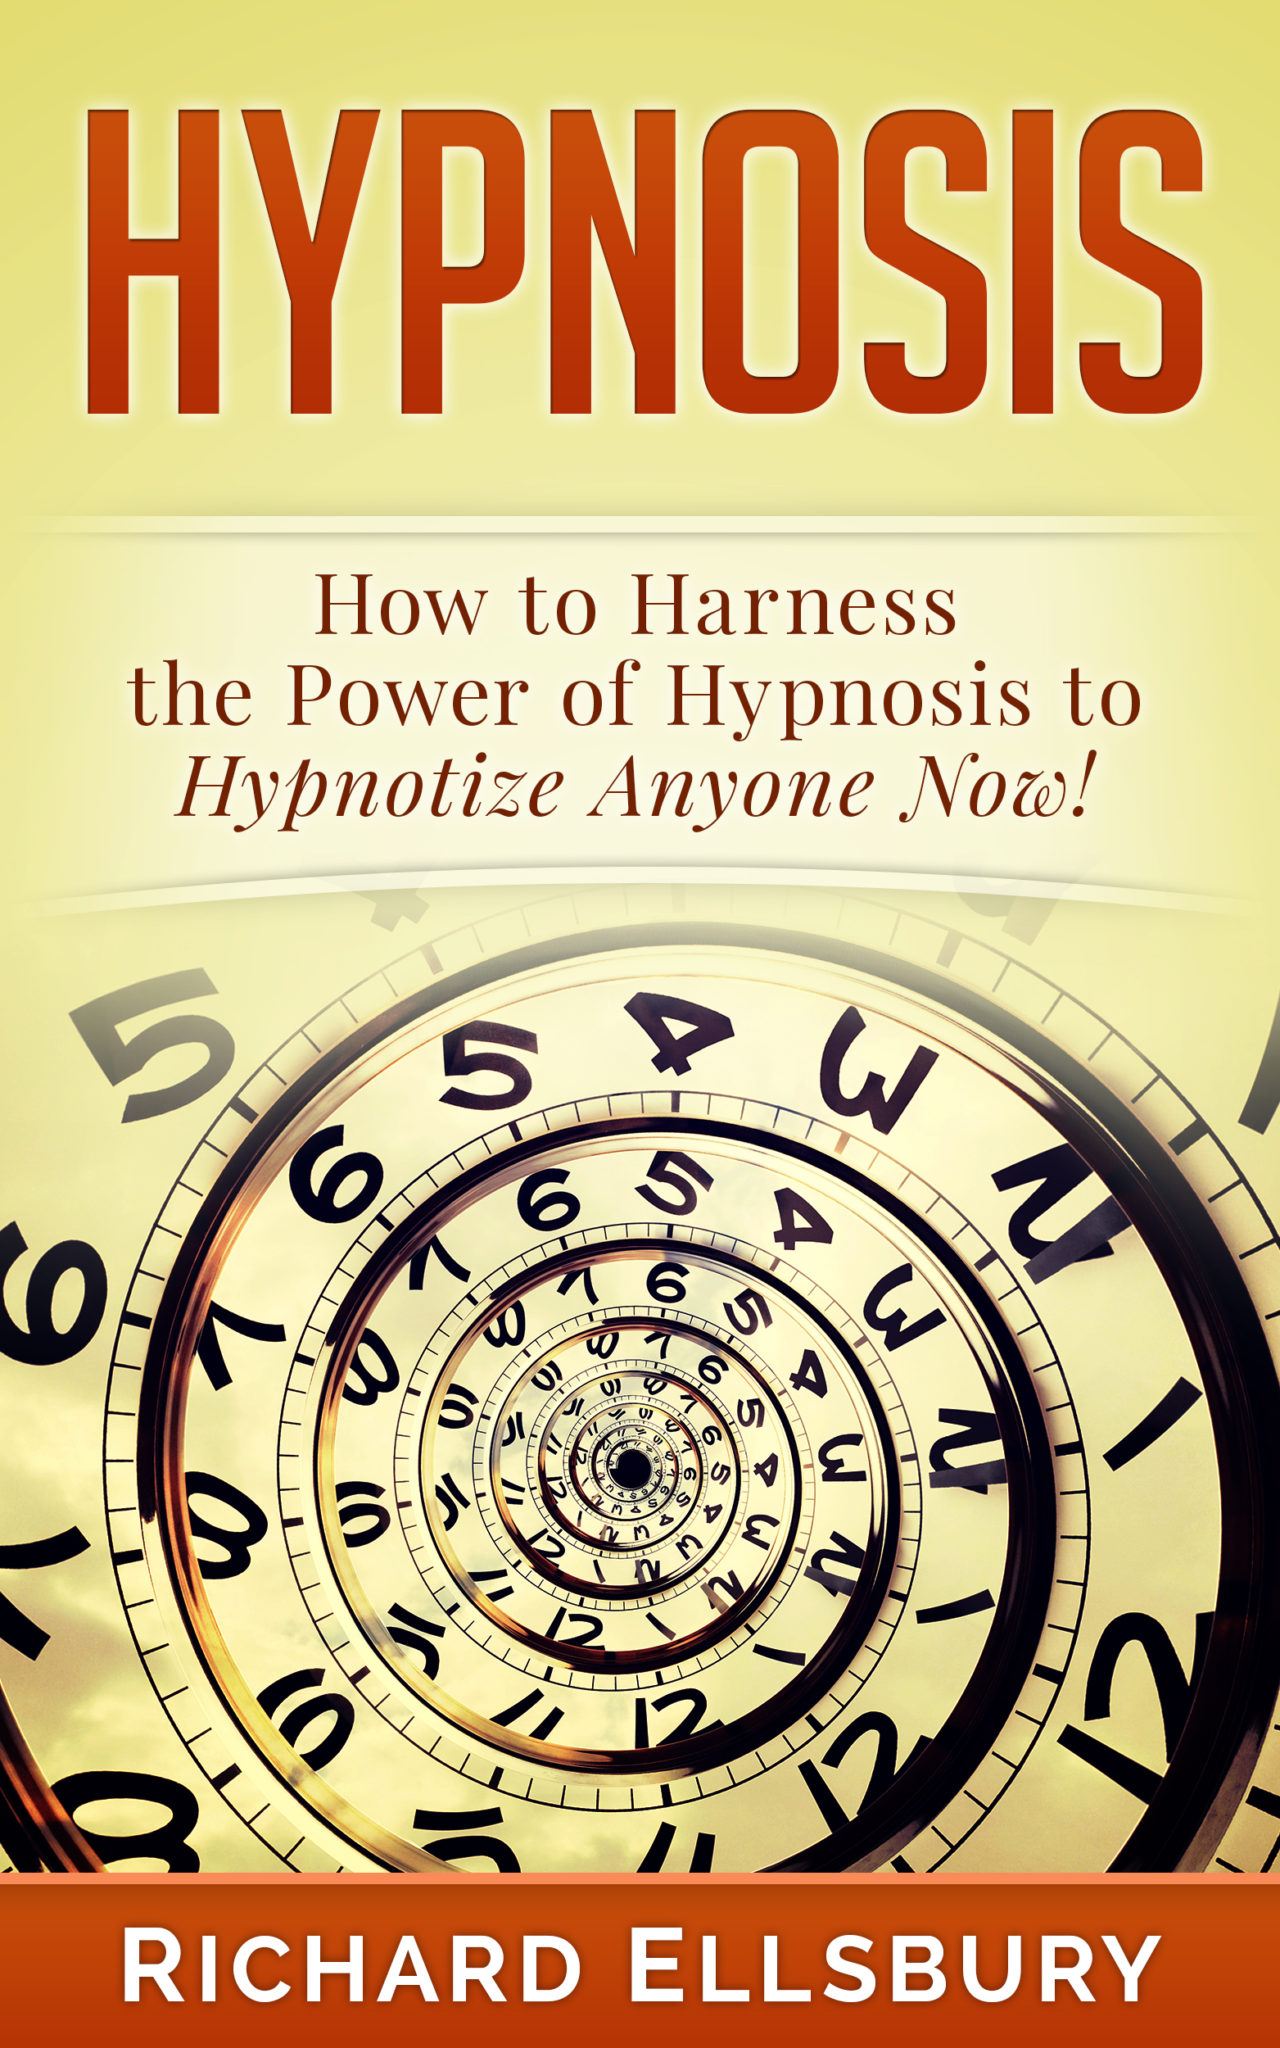 FREE: Hypnosis: How to Harness the Power of Hypnosis to Hypnotize Anyone Now! by Richard Ellsbury